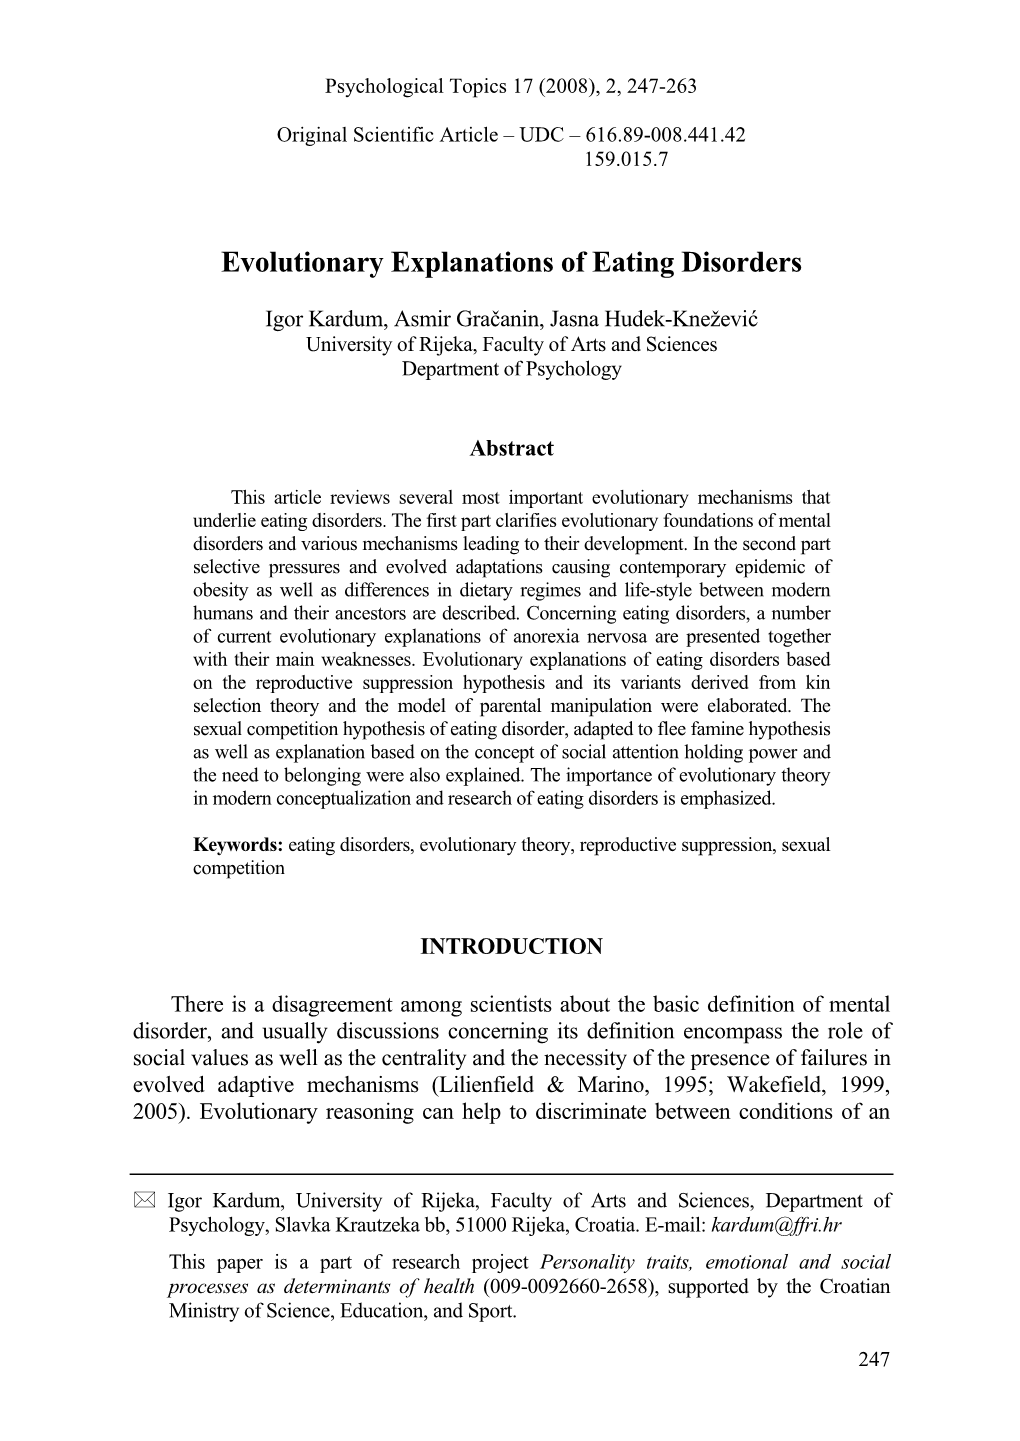 Evolutionary Explanations of Eating Disorders